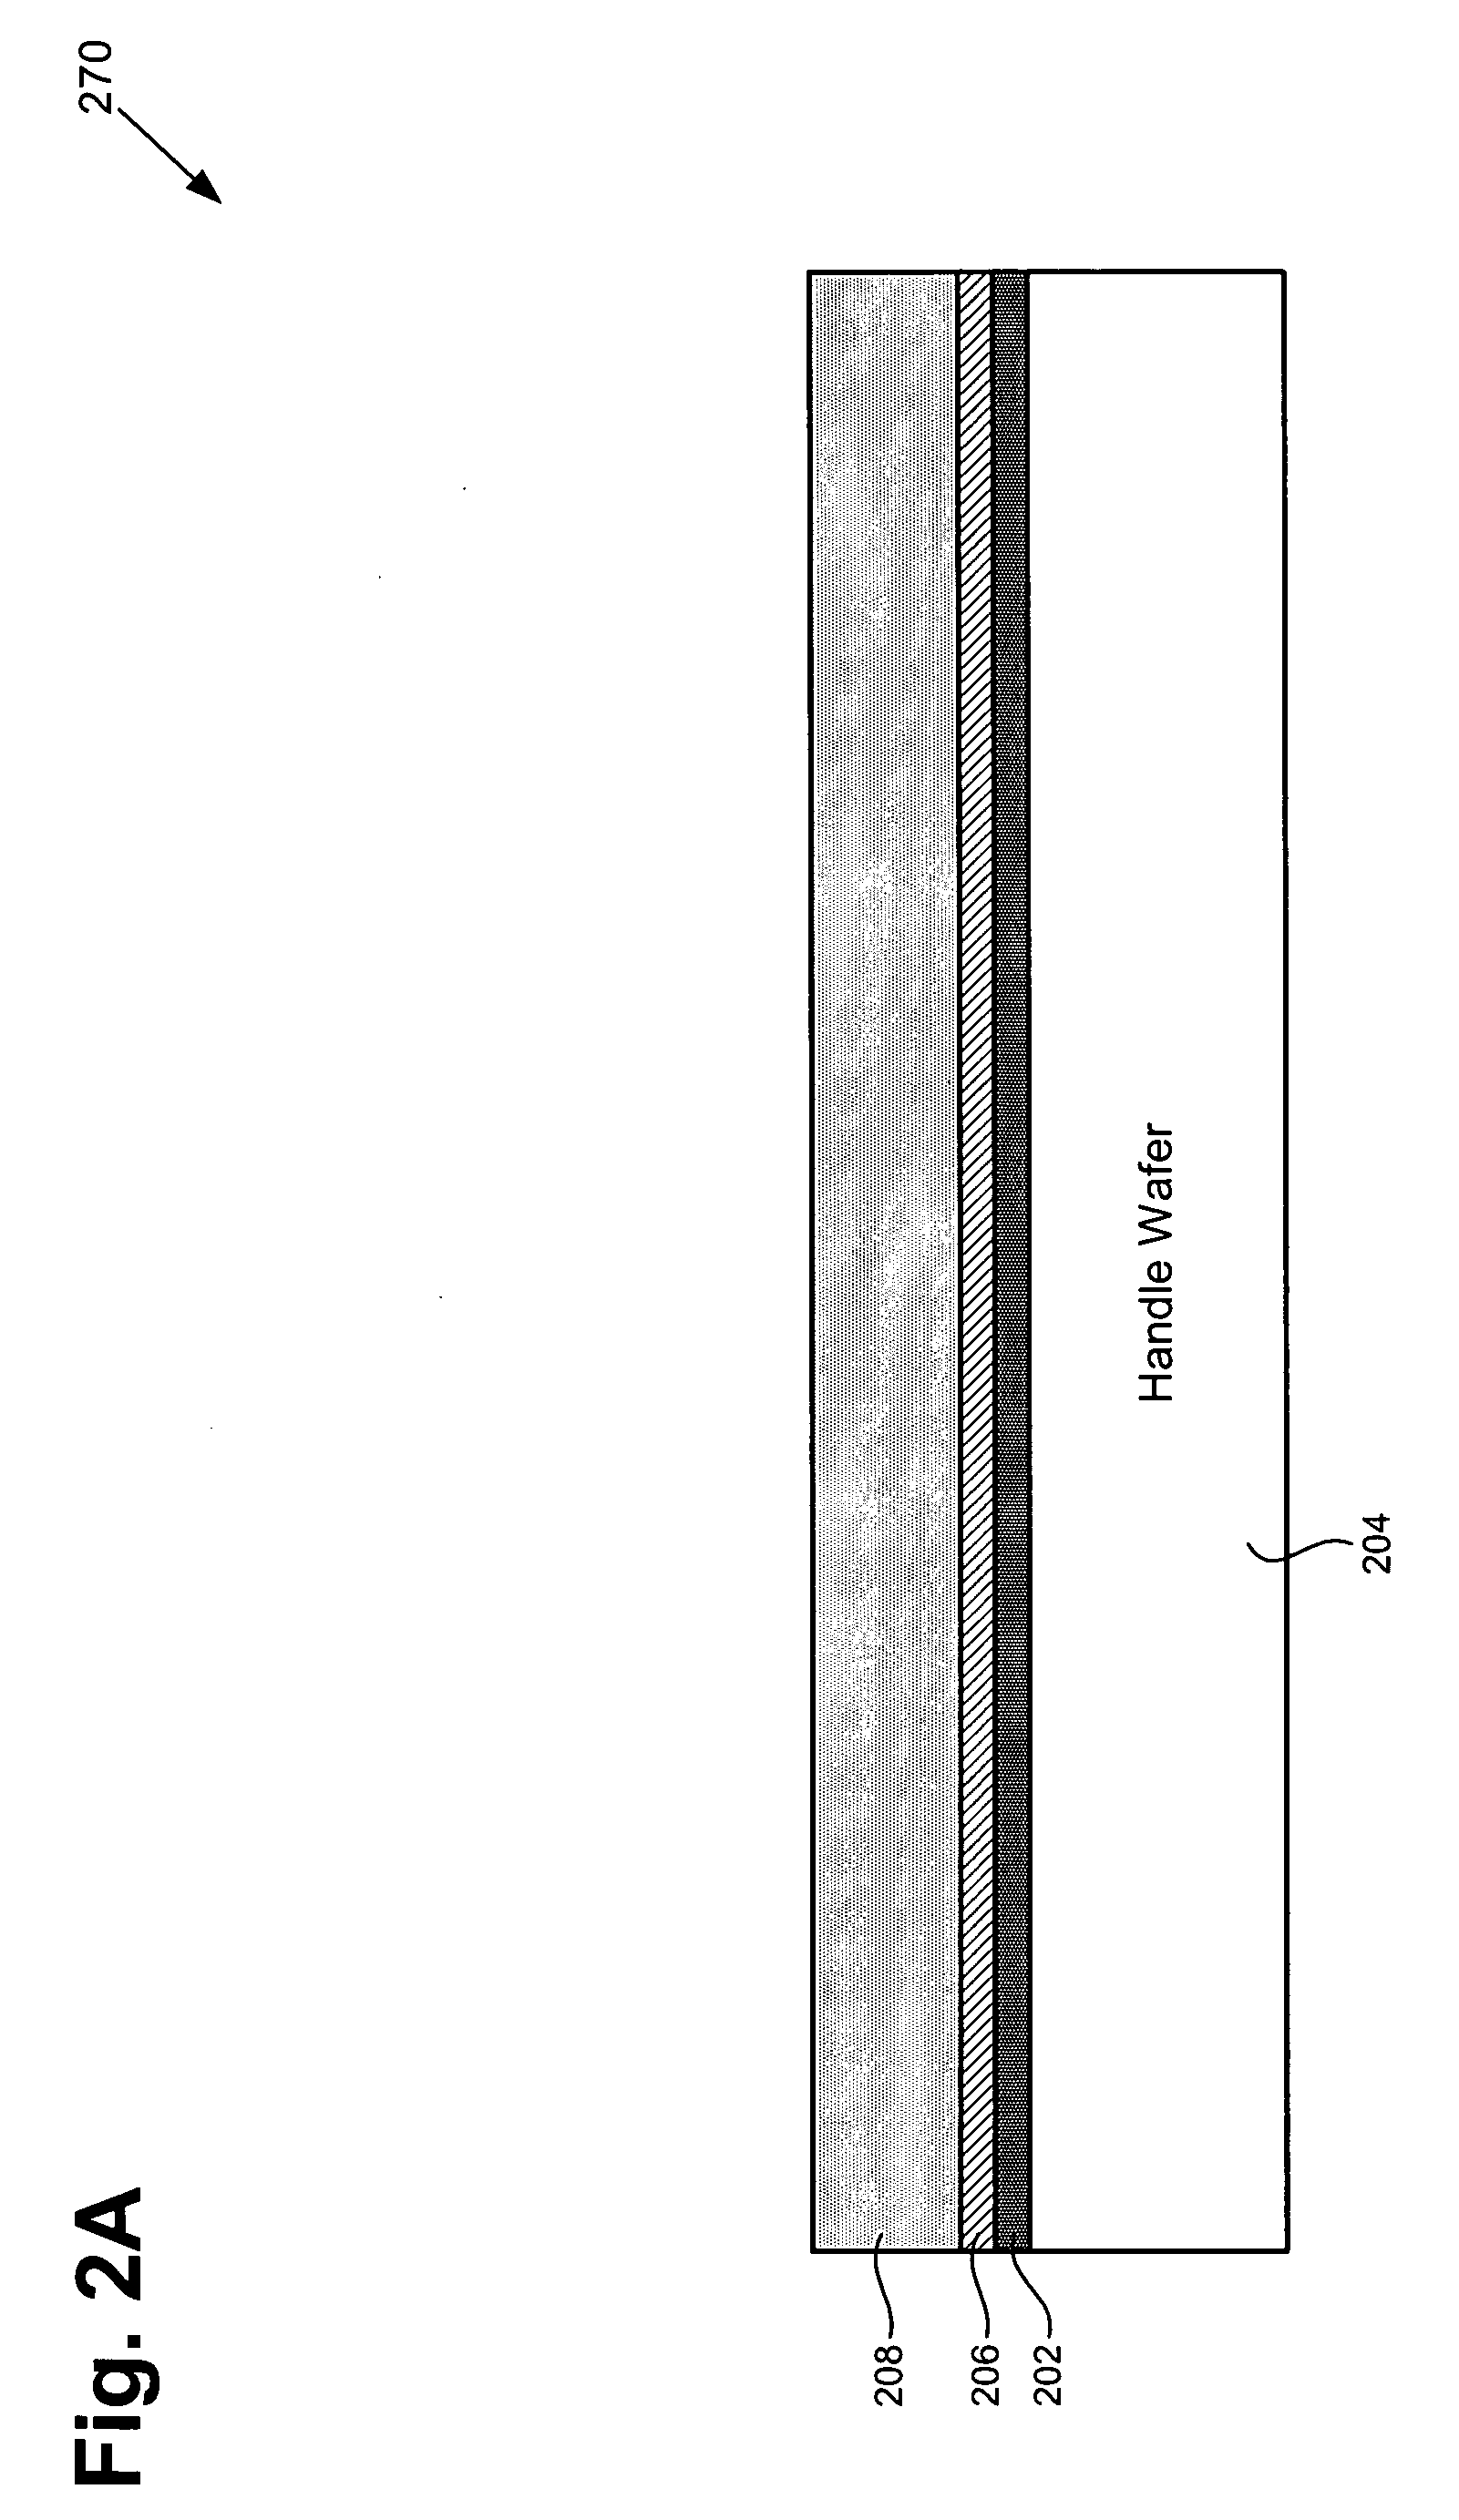 Wafer level package including a device wafer integrated with a passive component